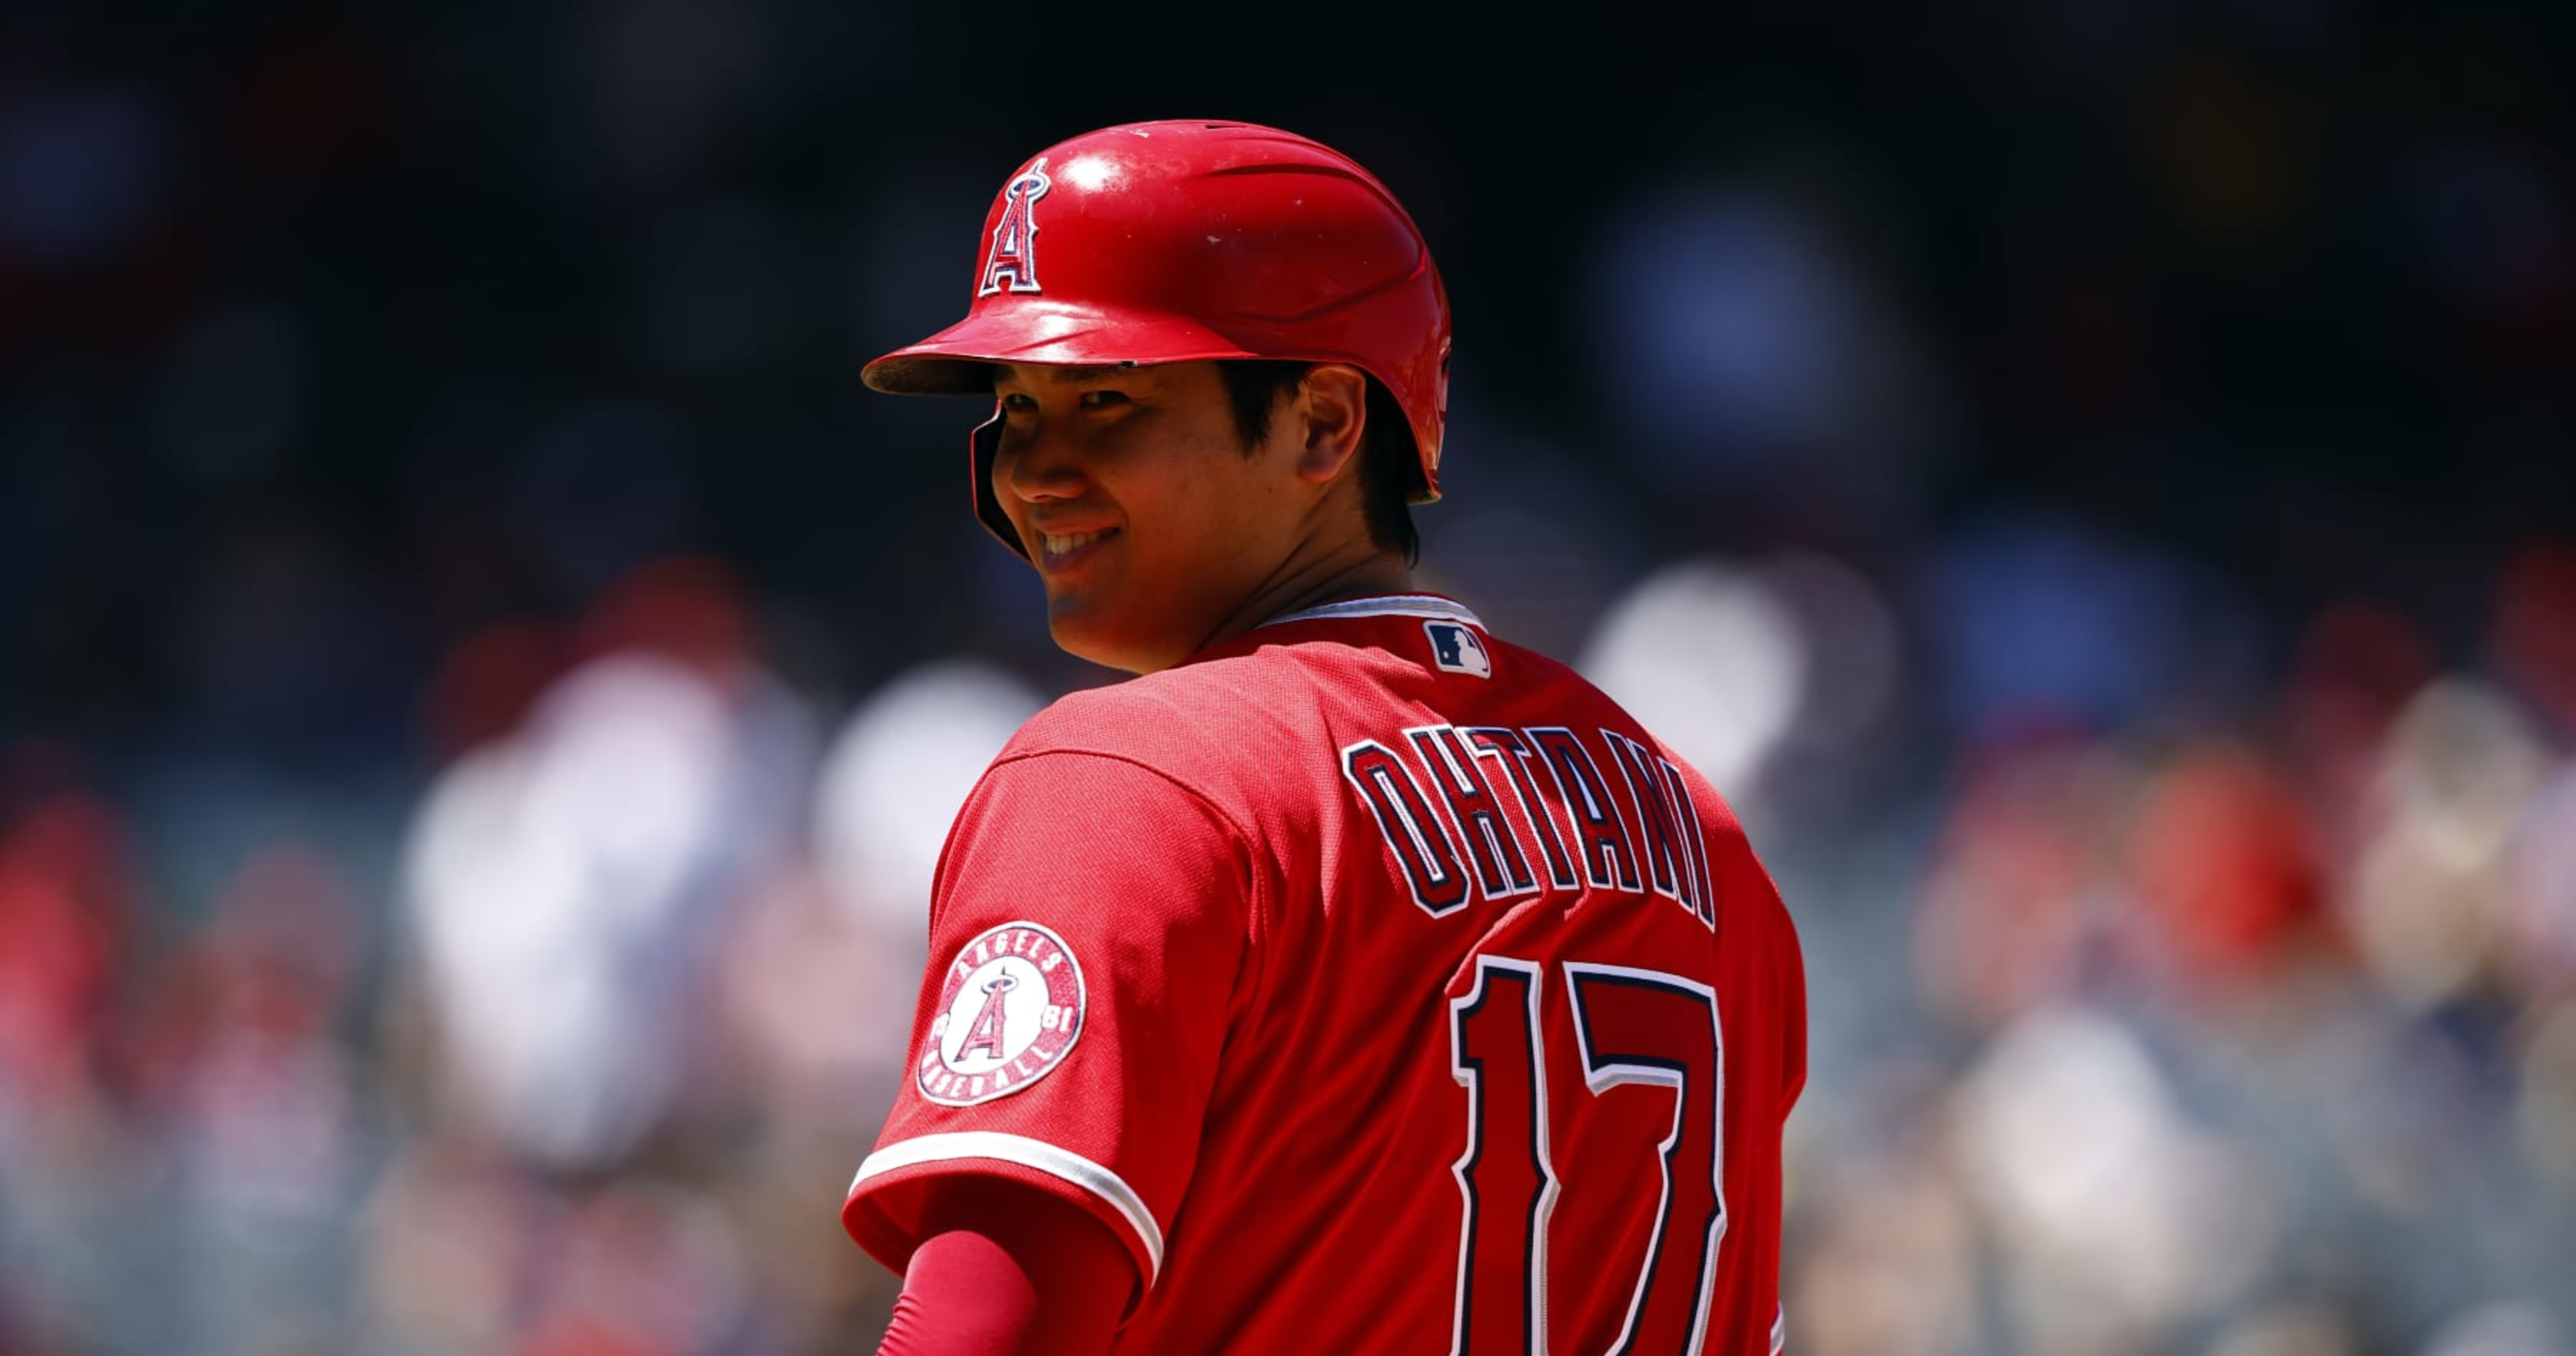 MLB: Shohei Ohtani in Angels' lineup as DH while nursing blister